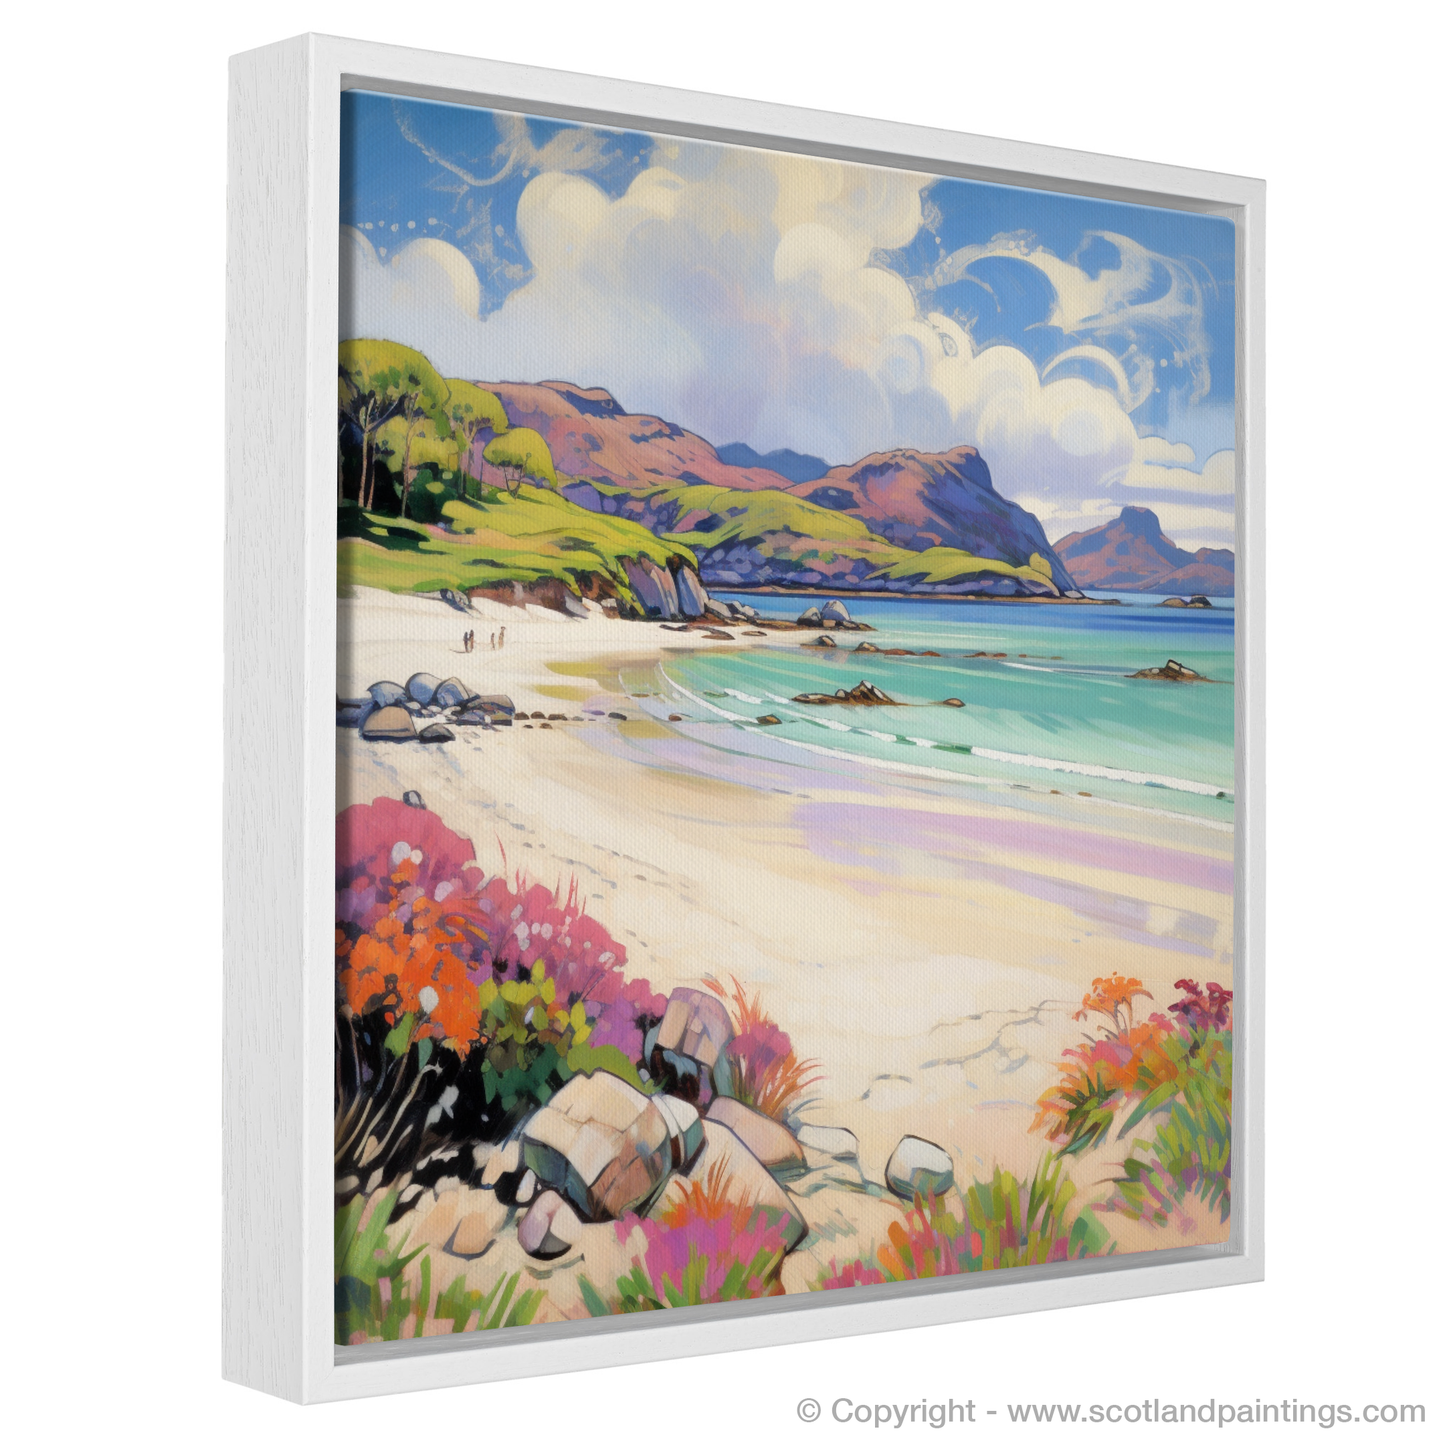 Painting and Art Print of Silver Sands of Morar in summer entitled "Summer Vibrance at Silver Sands of Morar".